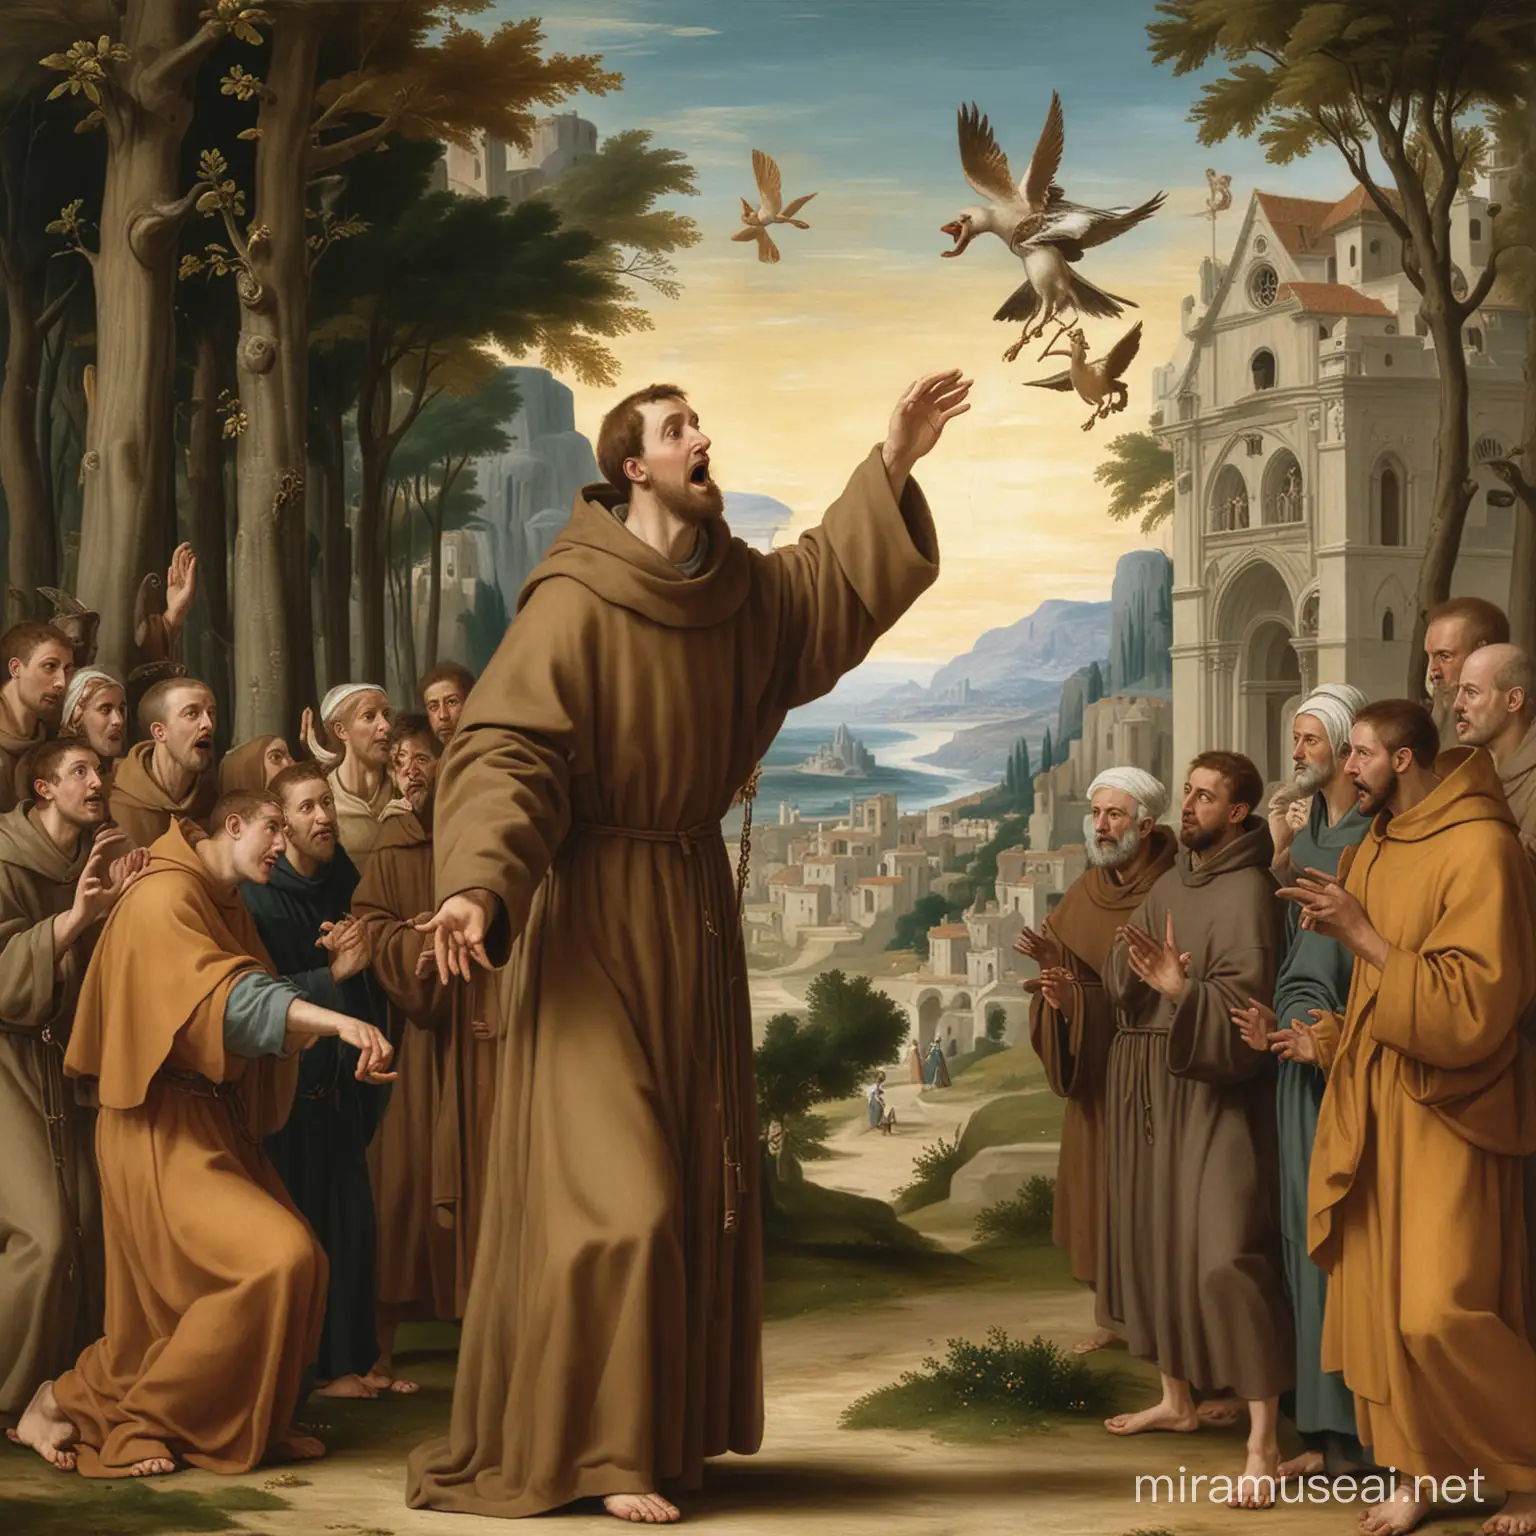 St Francis of Assisi
 preaching
